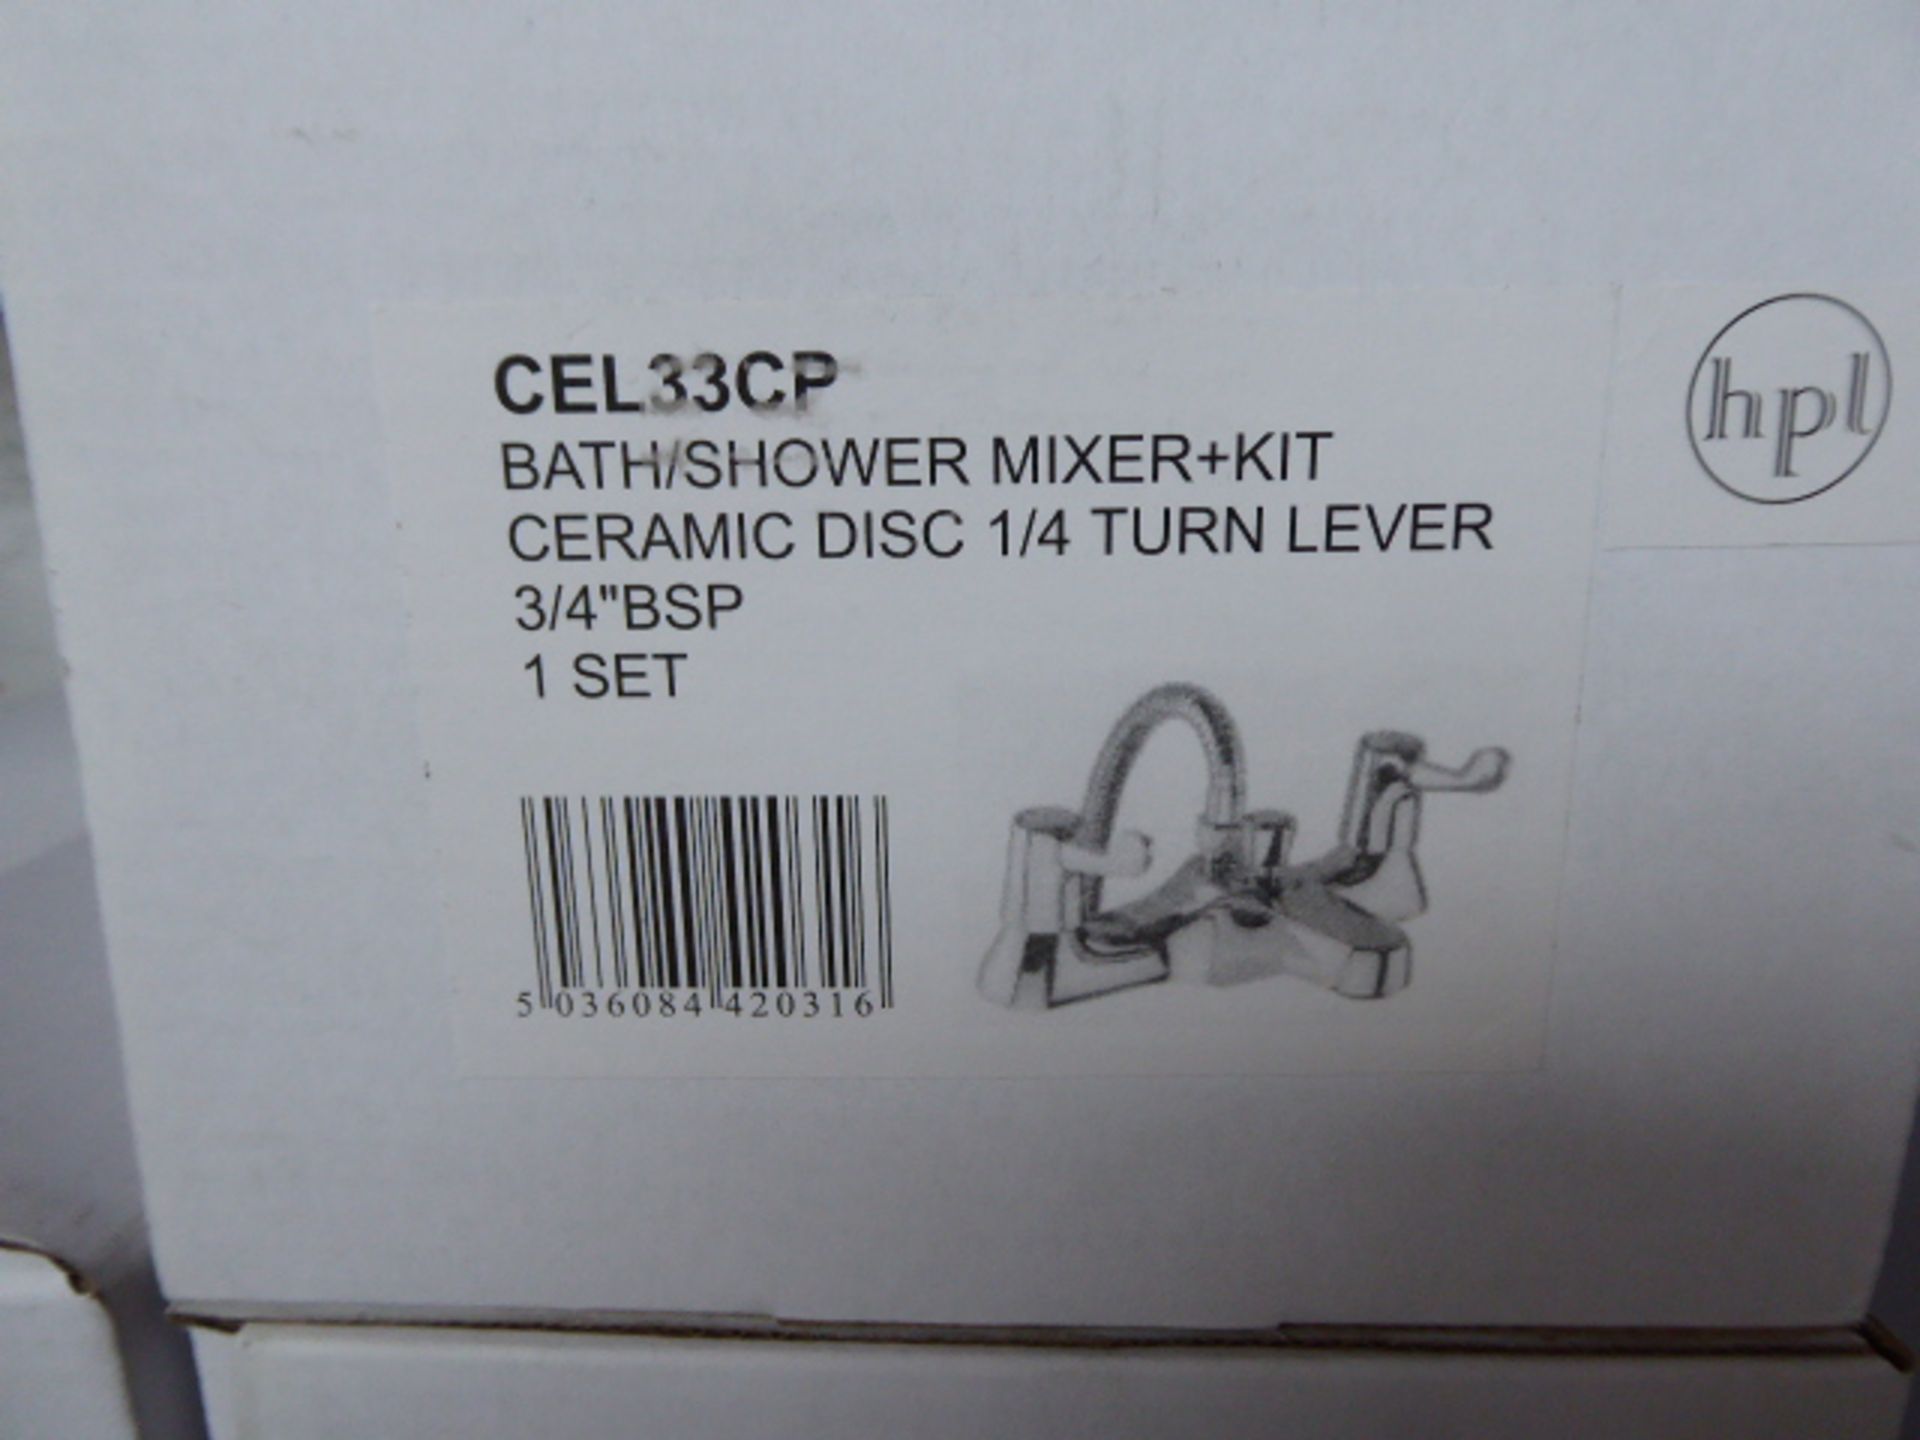 3 bath shower mixer kits with ceramic disc 1/4 turn lever